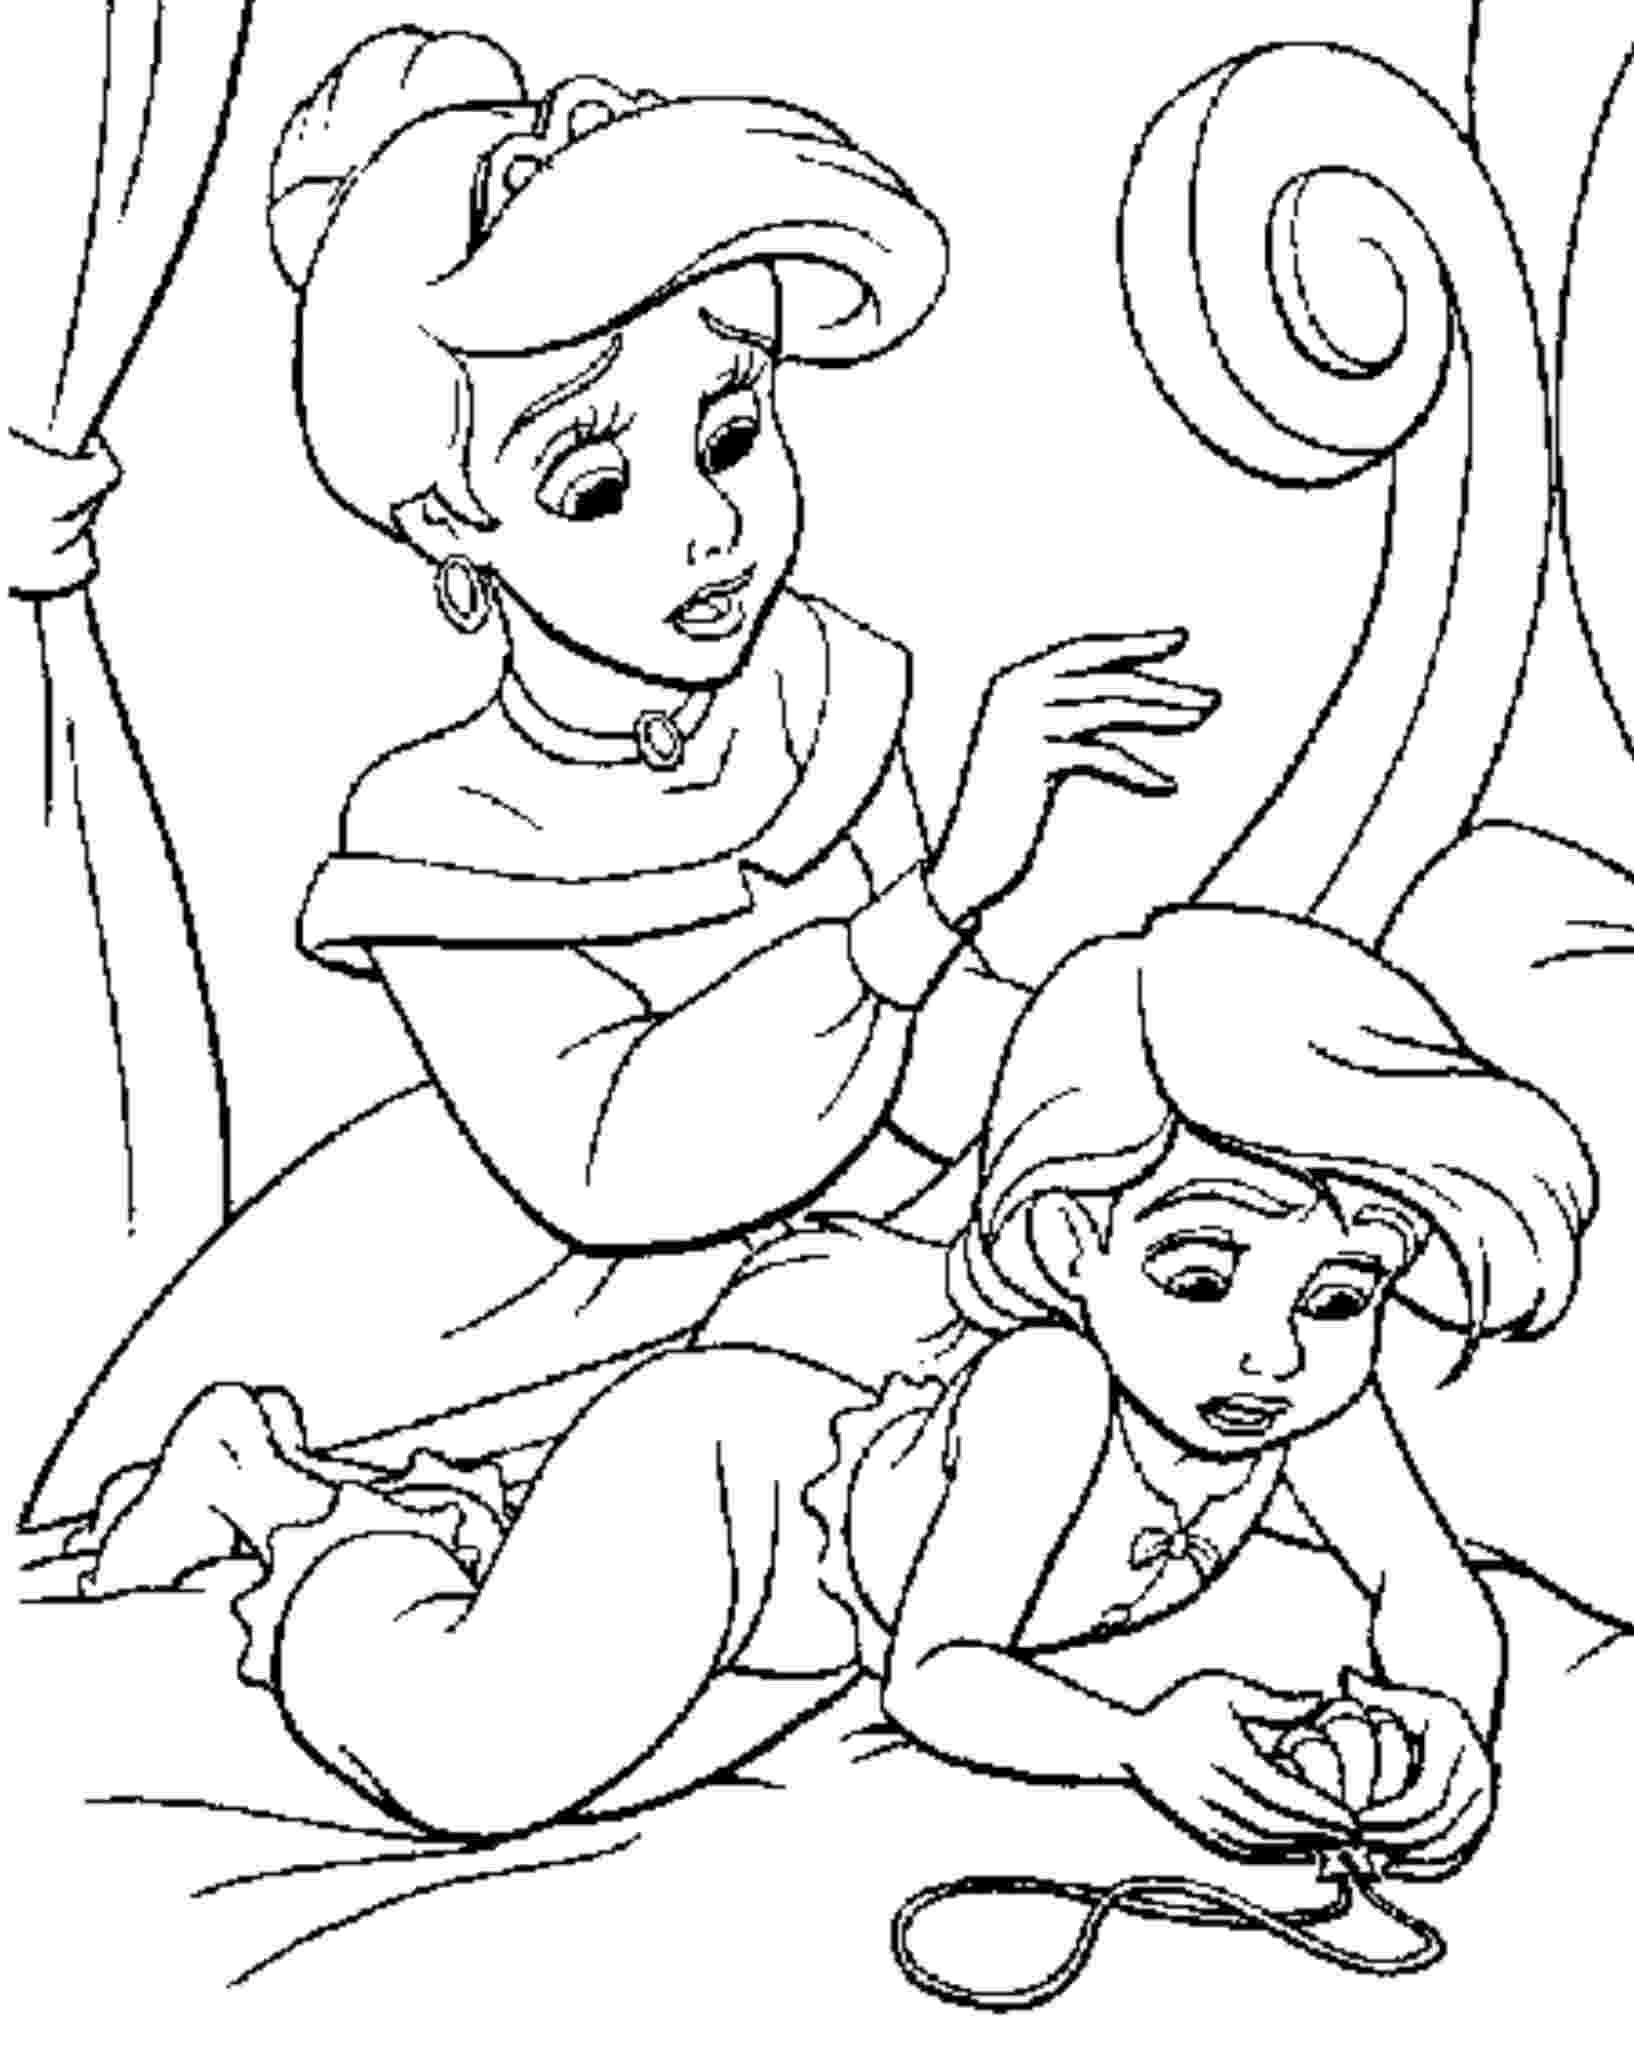 ariel the little mermaid coloring pages print download find the suitable little mermaid mermaid ariel pages the little coloring 